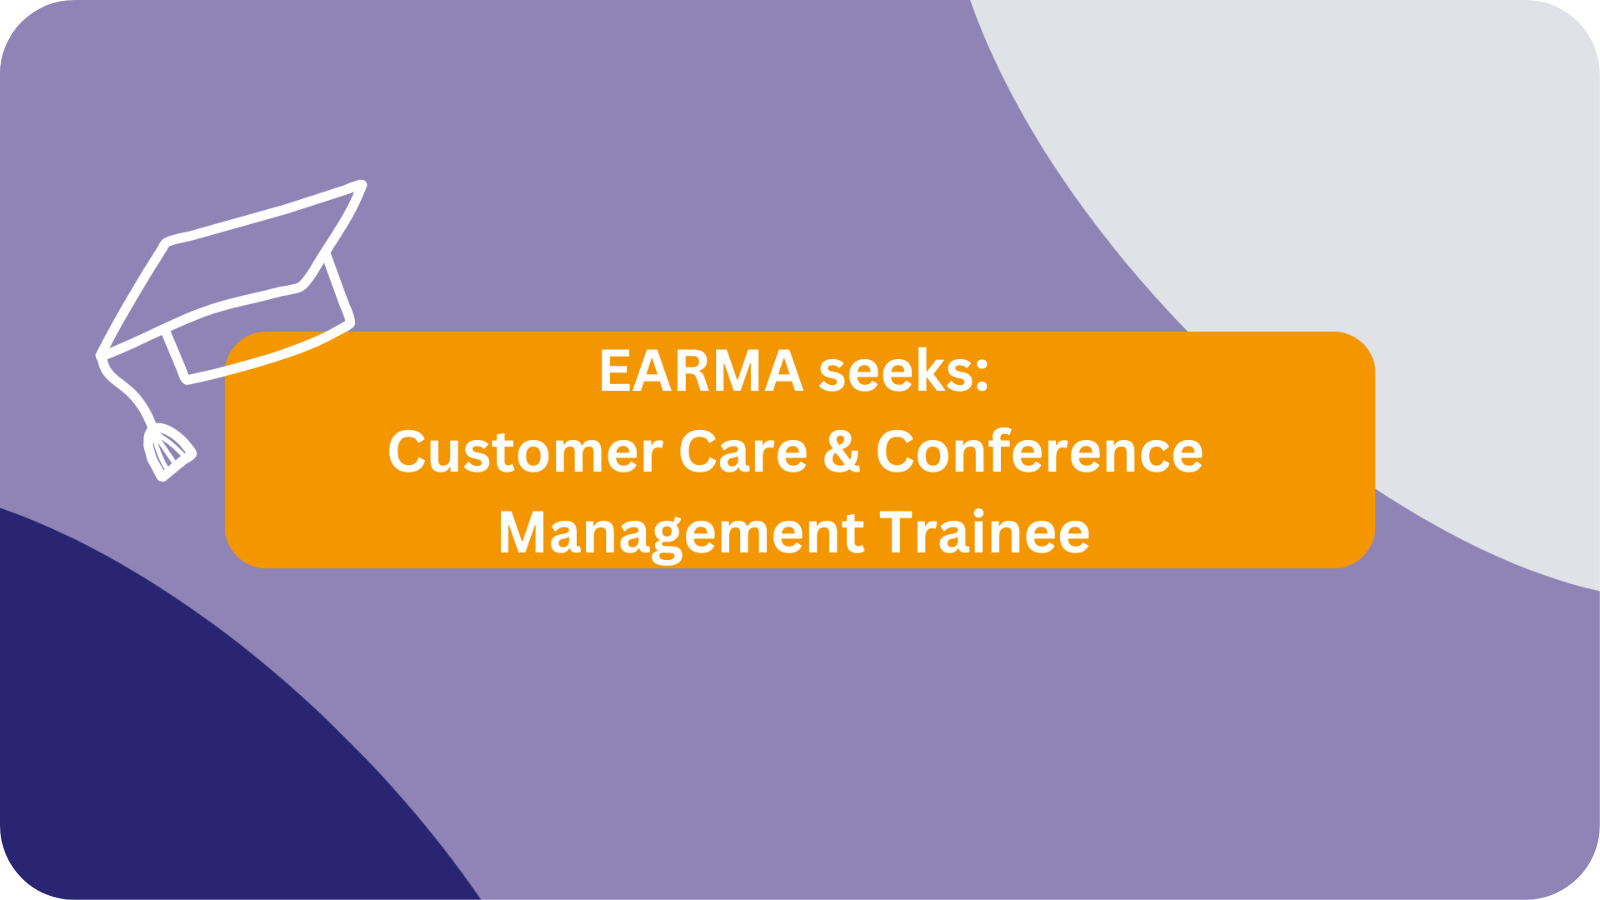 EARMA seeks a customer care and conference management trainee